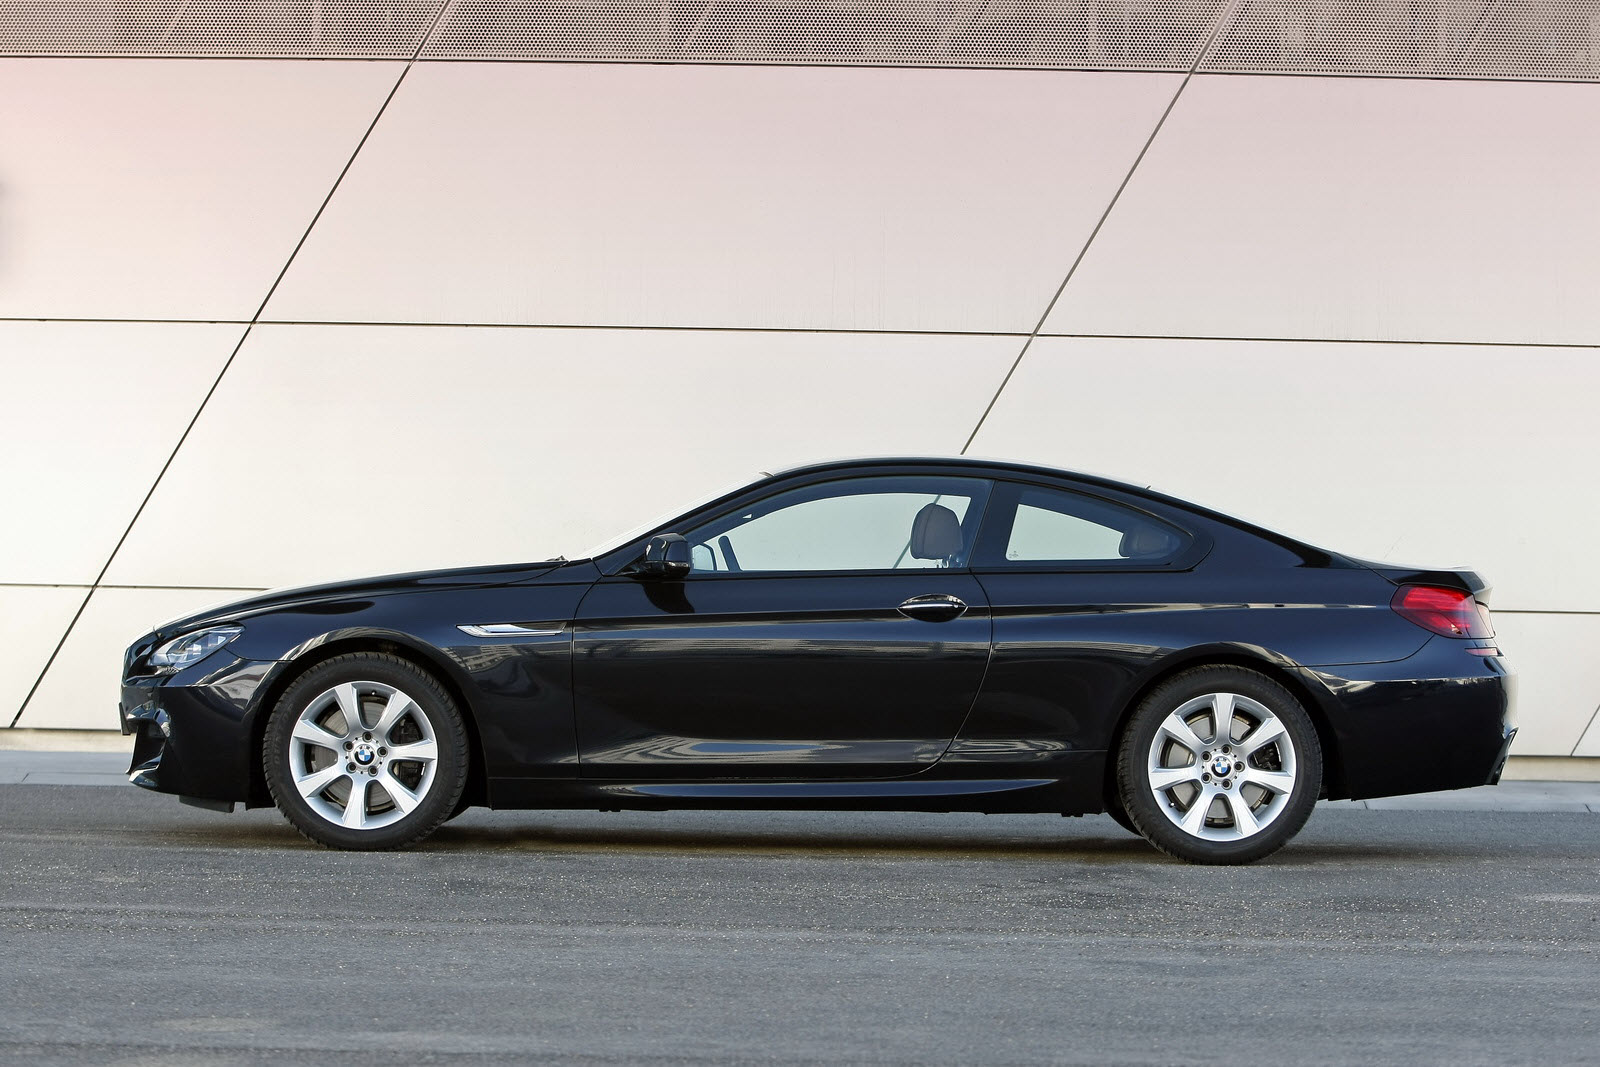 The BMW 6 Series Coupe with xDrive and sixcylinder in